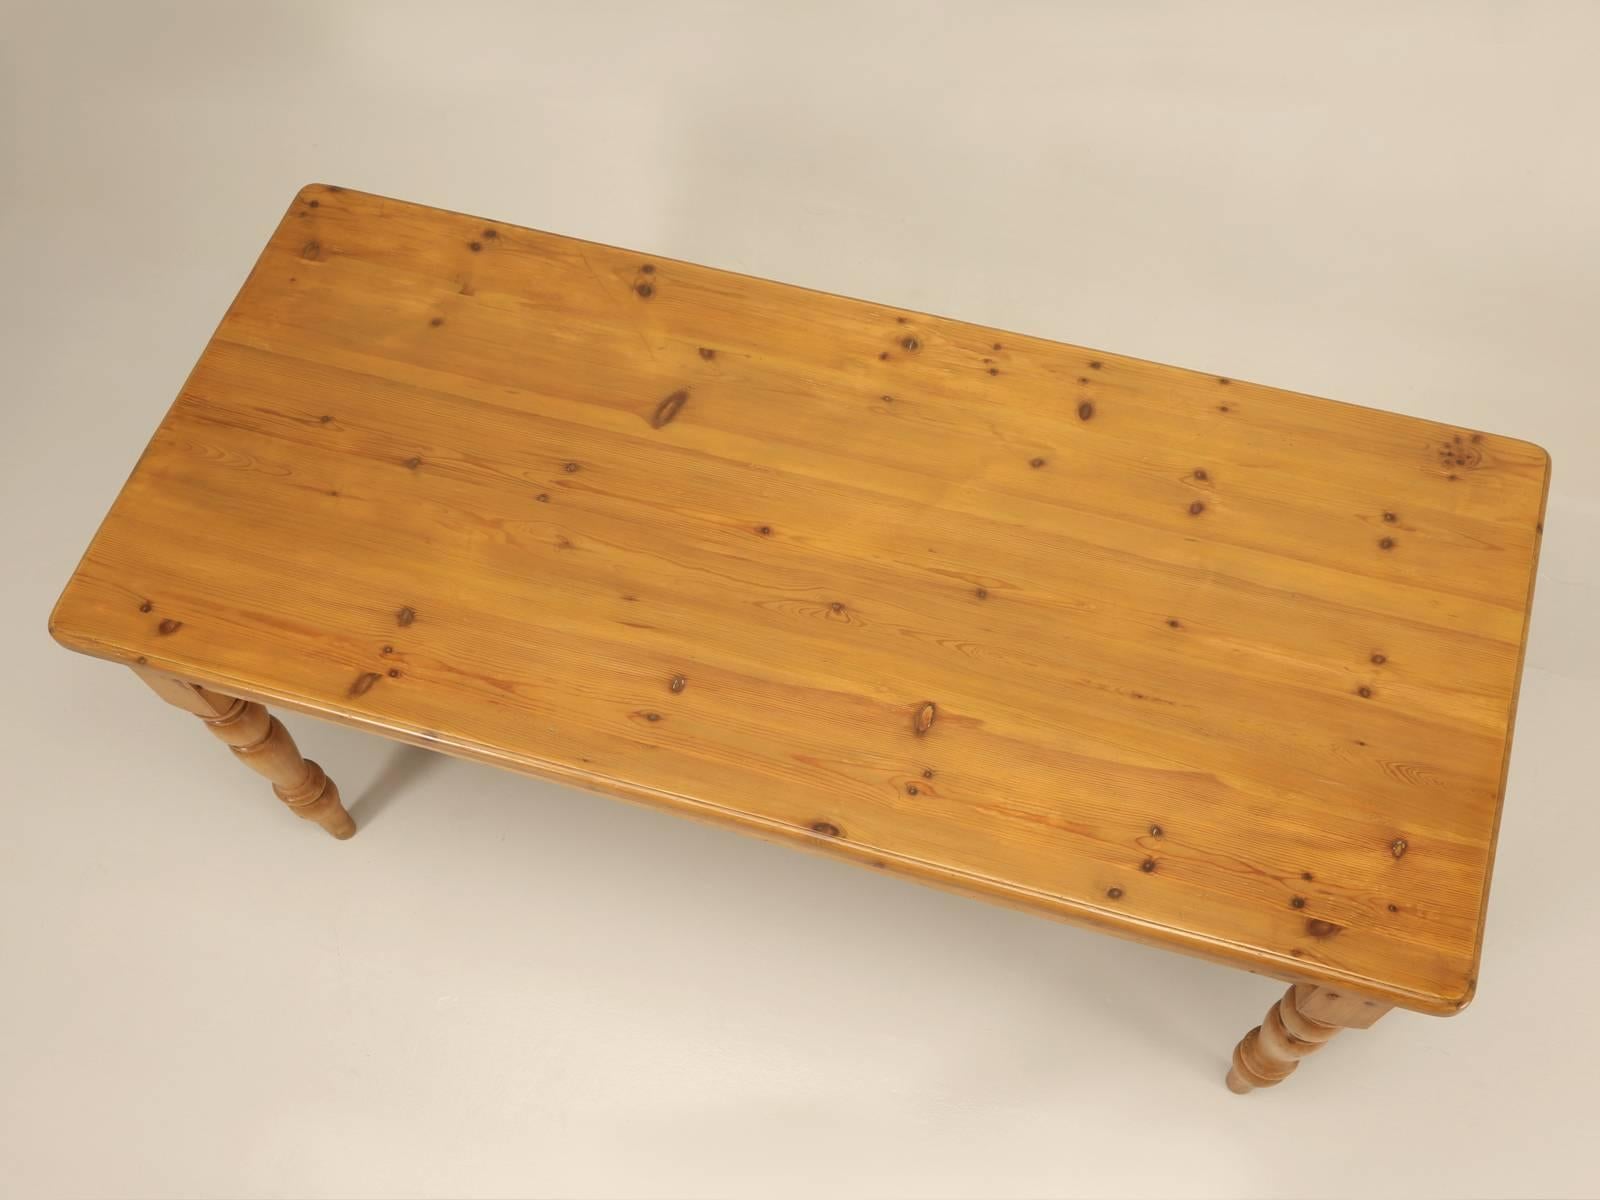 English pine reproduction farm table made about 25 years ago in the North of England and we just refinished it in our Old Plank workshop. When this was made, the end drawer was a useful option available for napkin storage. Nicely constructed from